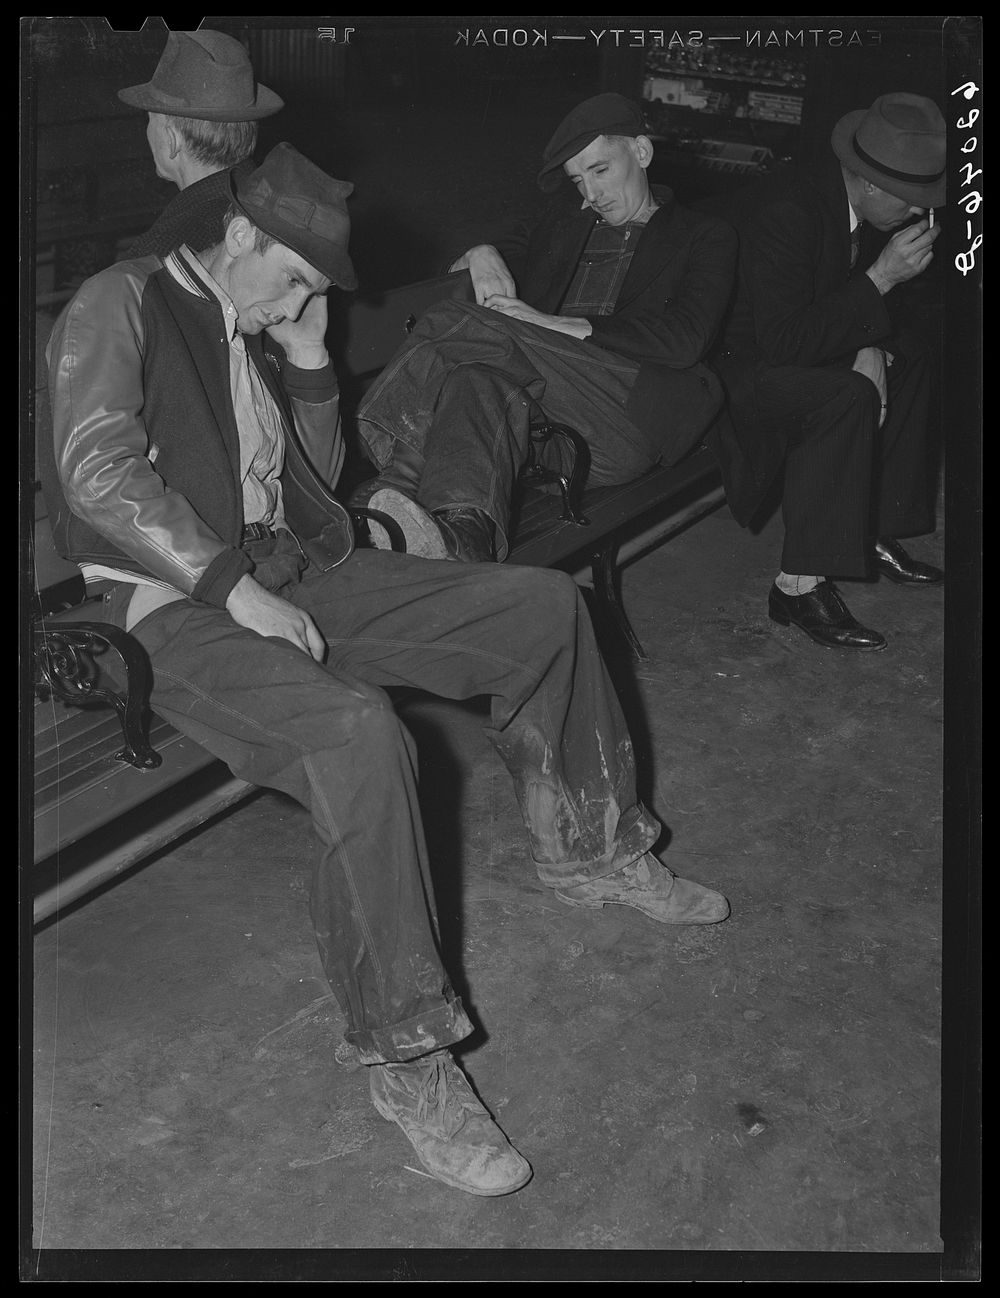 Men spending the night in railroad station. Radford, Virginia. Sourced from the Library of Congress.